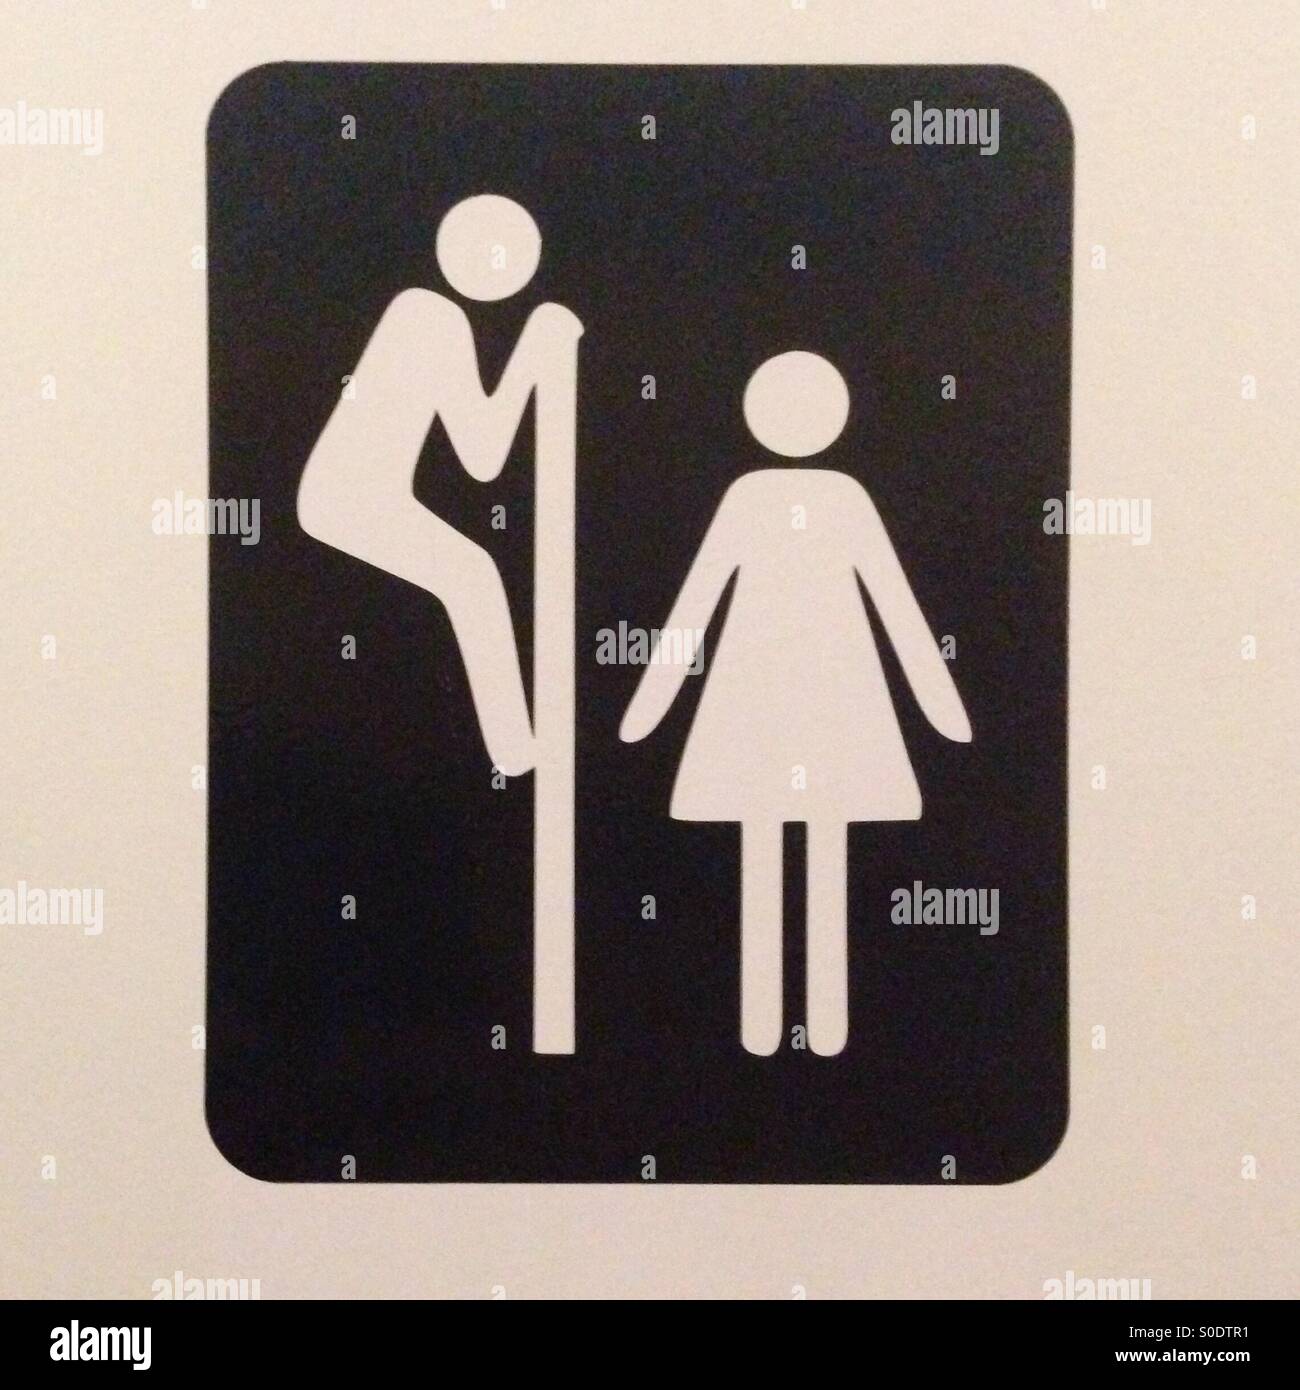 Interesting WC sign Stock Photo